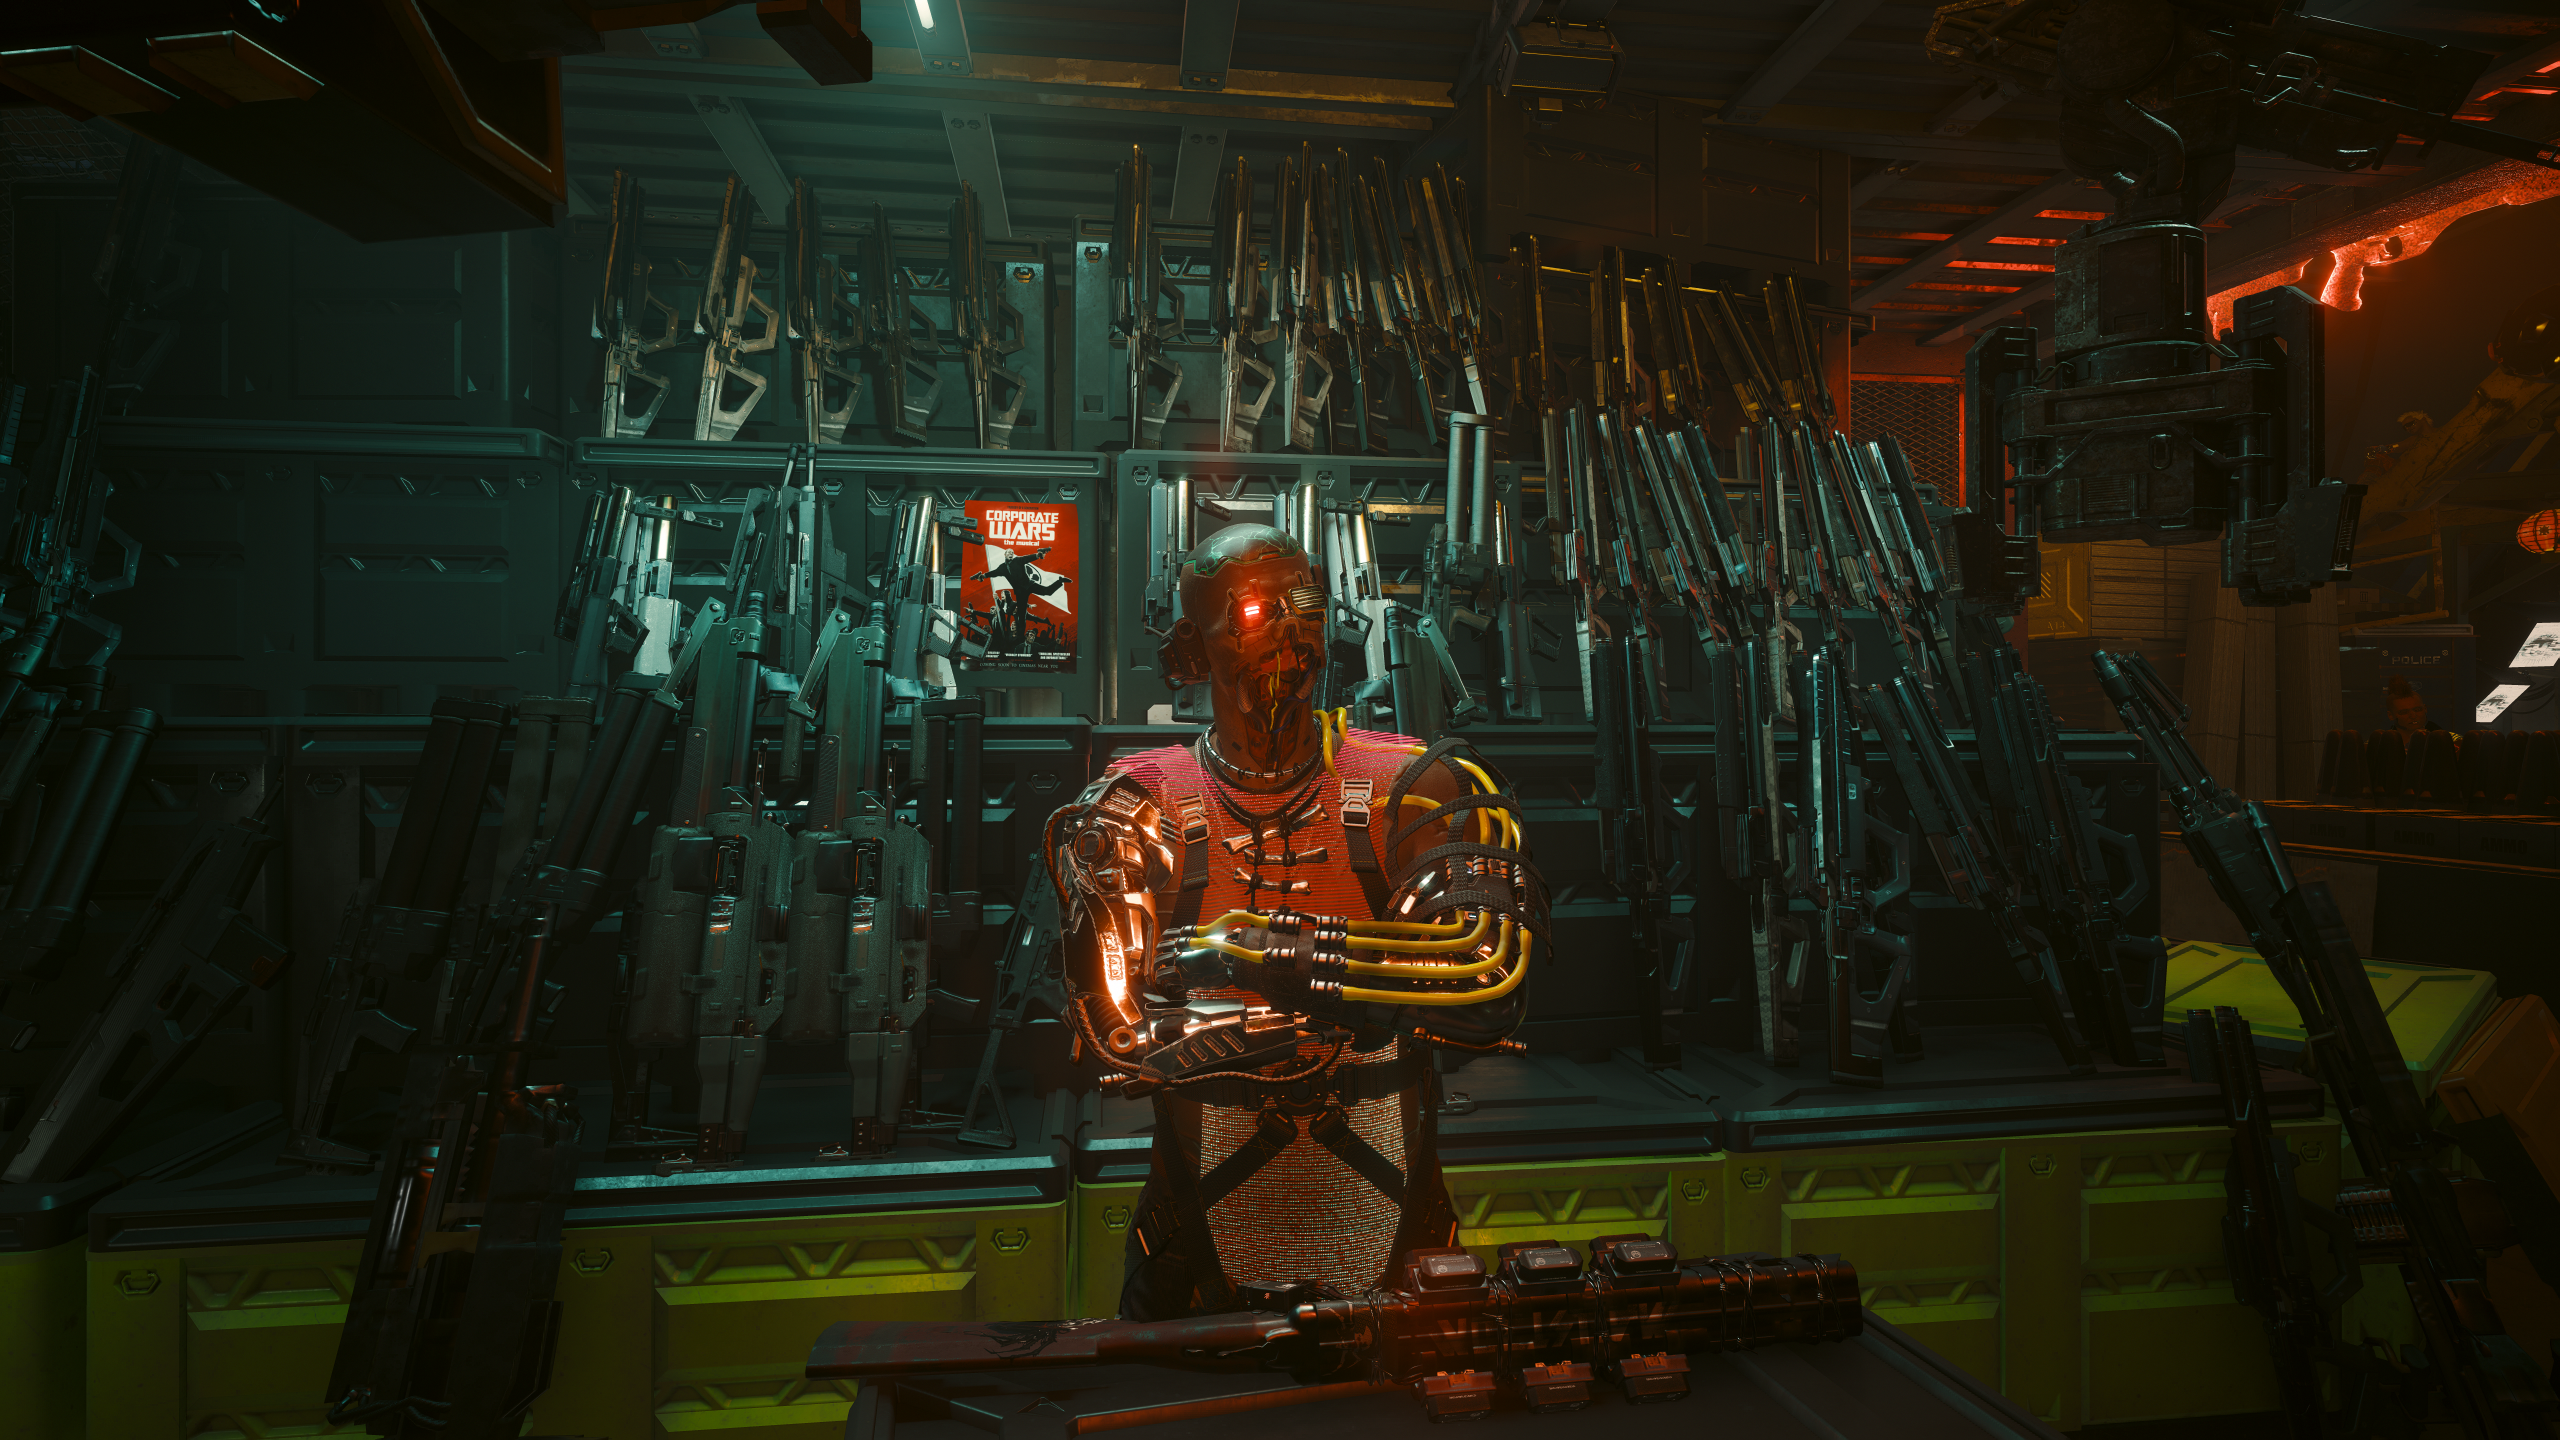 Cyberpunk merchant standing in front of row of weapons with visible damage and surgery on bionically altered face